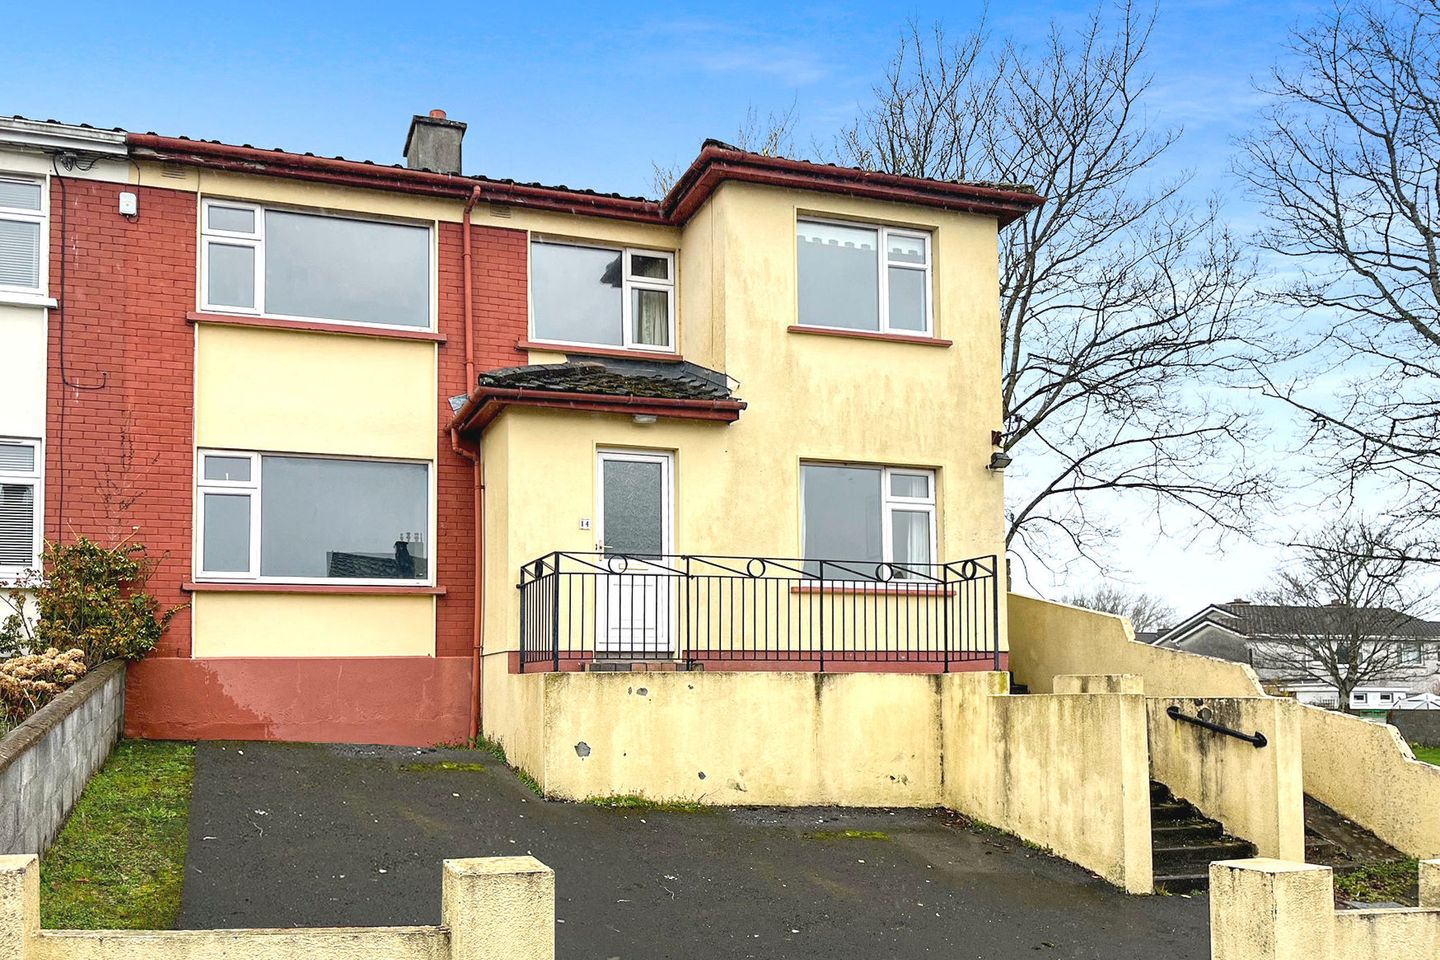 14 Sycamore Drive, Highfield Park, Galway City, Co. Galway